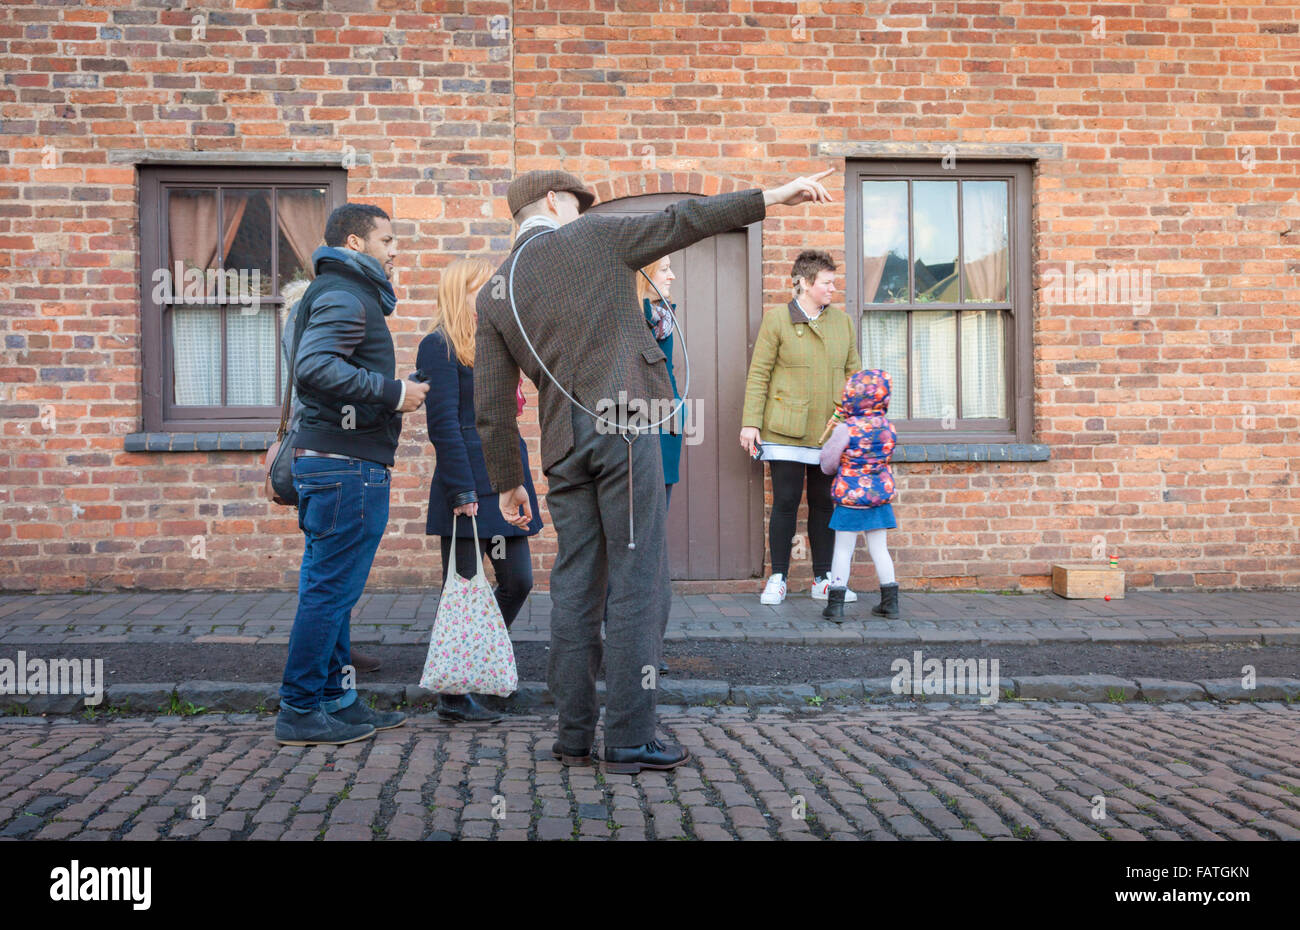 Visitors to the Black Country Living Museum, Dudley, UK getting directions from a museum guide in a street. Stock Photo